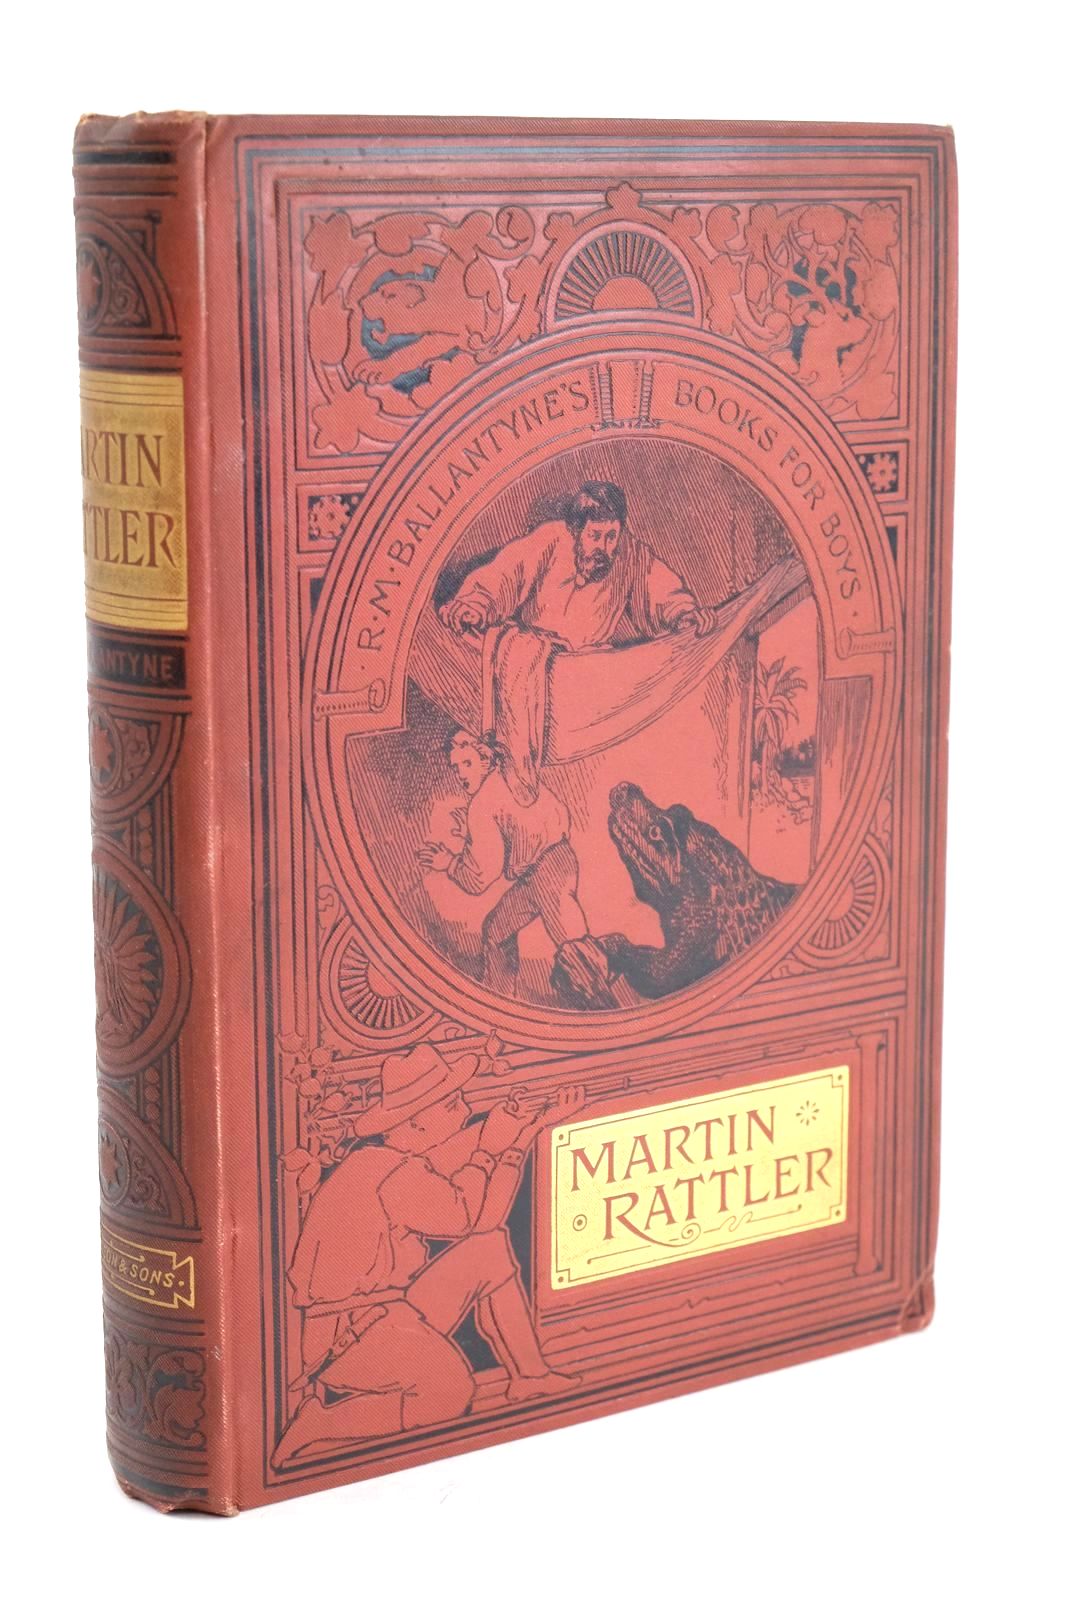 Photo of MARTIN RATTLER written by Ballantyne, R.M. published by T. Nelson & Sons (STOCK CODE: 1324659)  for sale by Stella & Rose's Books